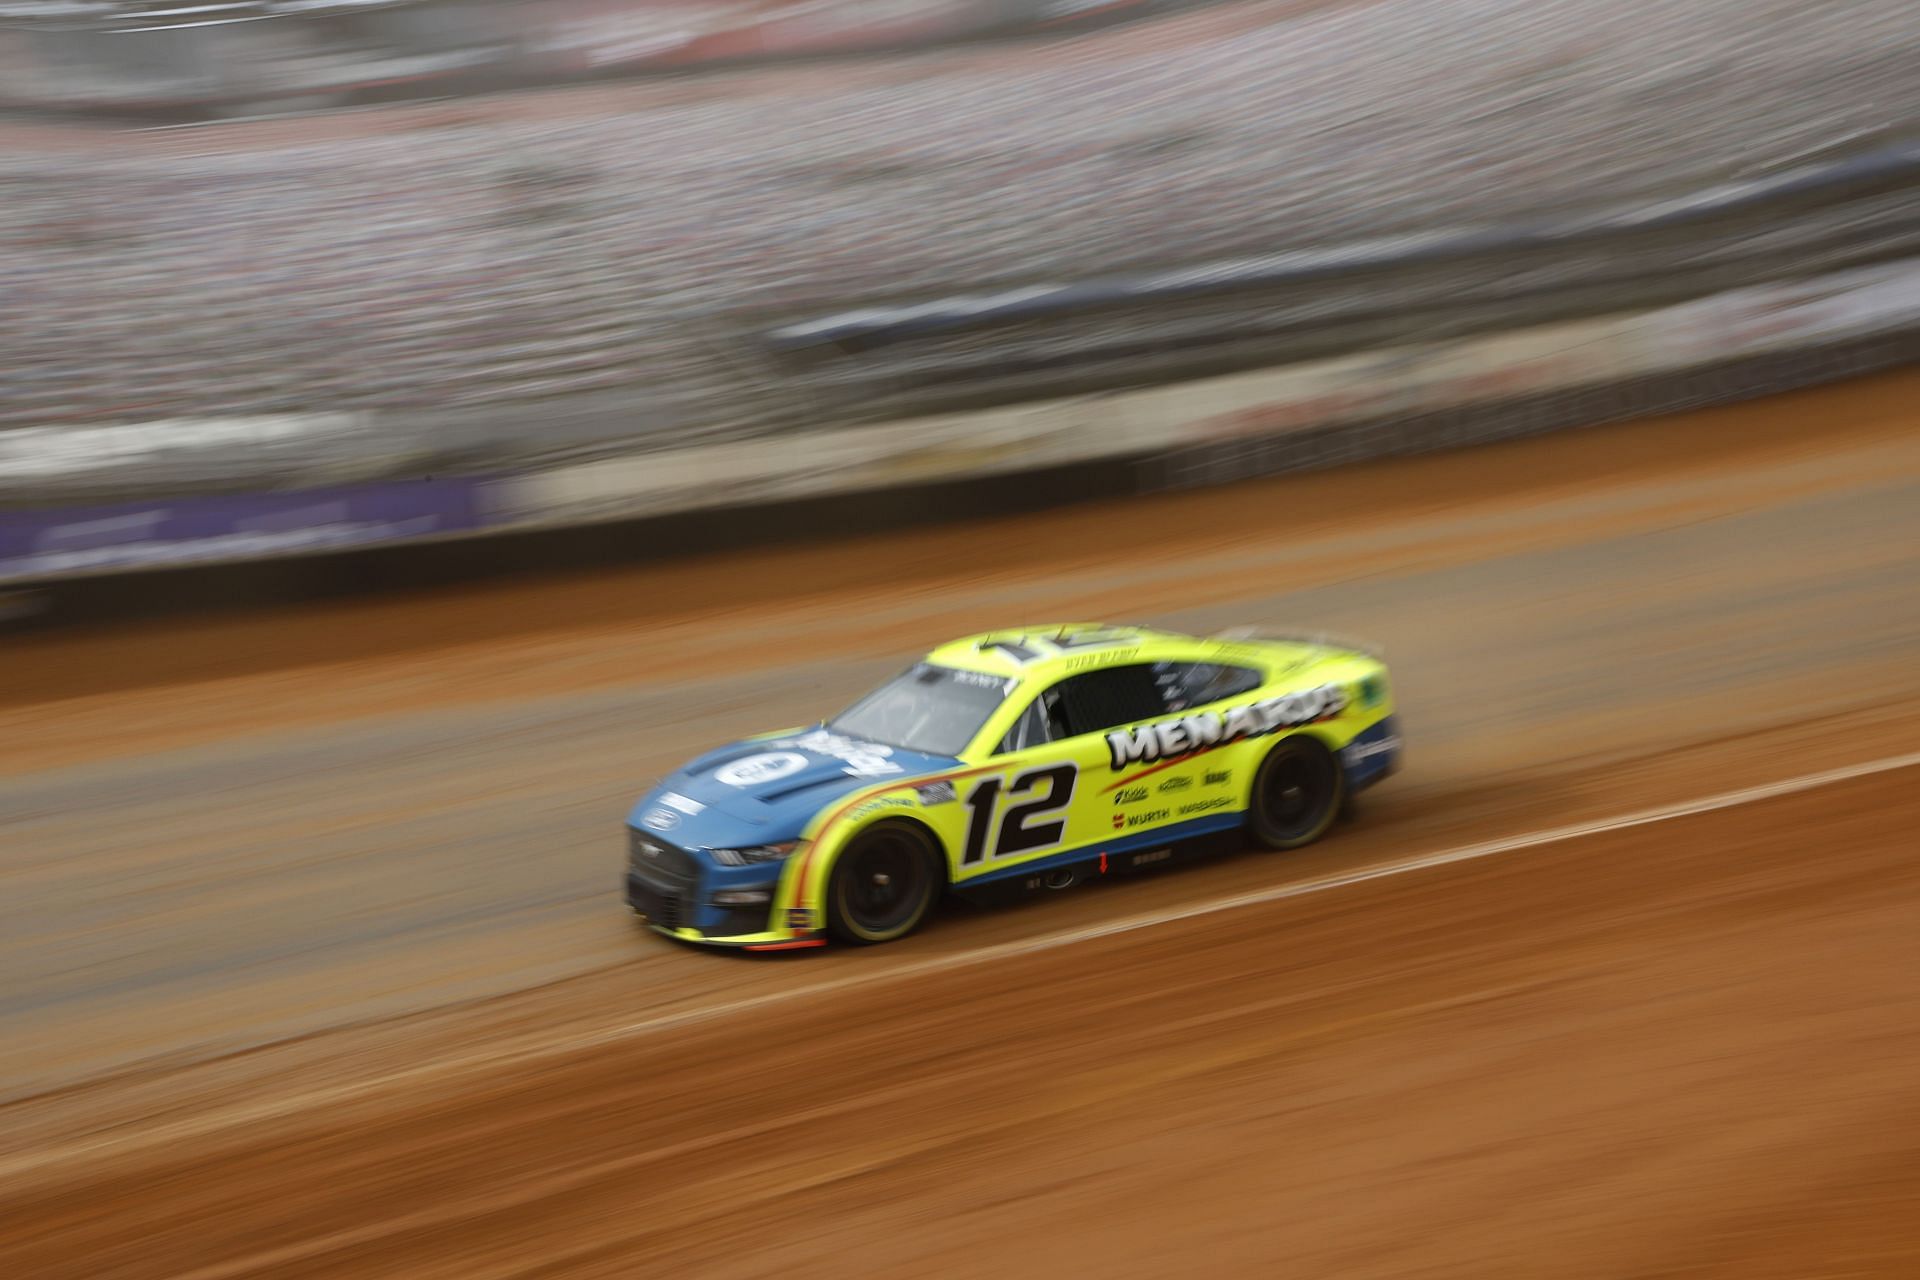 Ryan Blaney drives during first practice for the NASCAR Cup Series Food City Dirt Race at Bristol Motor Speedway. (Photo by Chris Graythen/Getty Images)